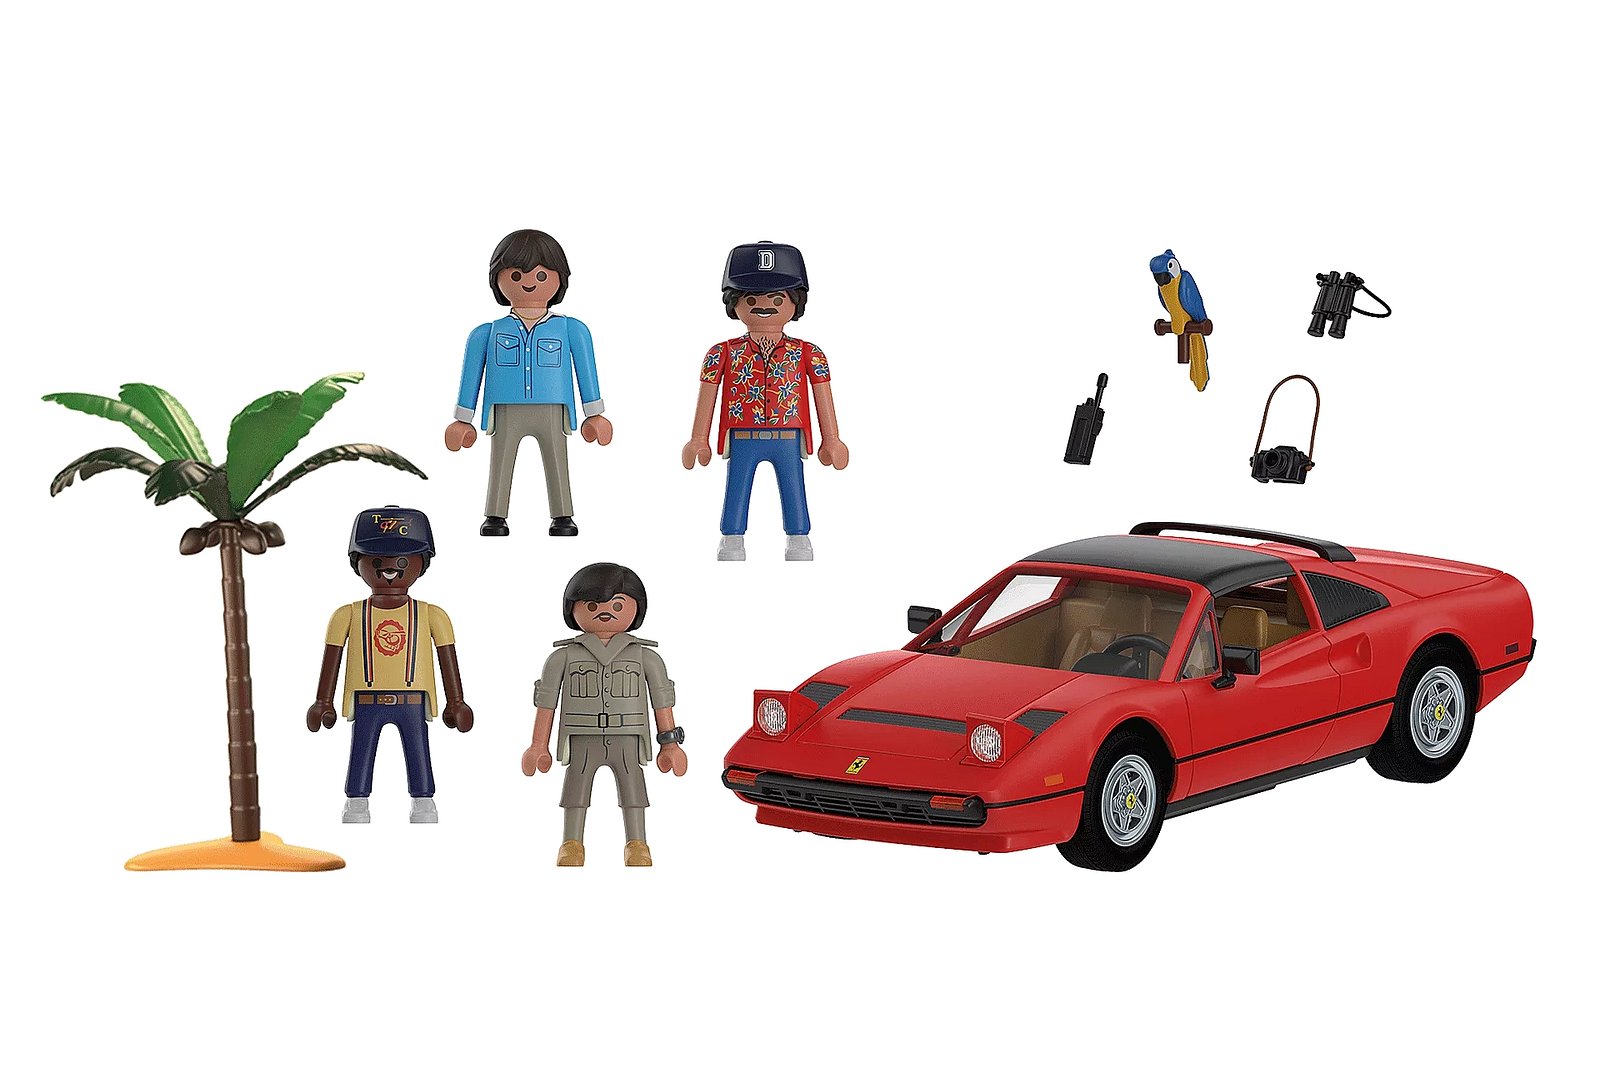 offbeat, tv's most iconic ferrari from magnum p.i. immortalized in new children's play set